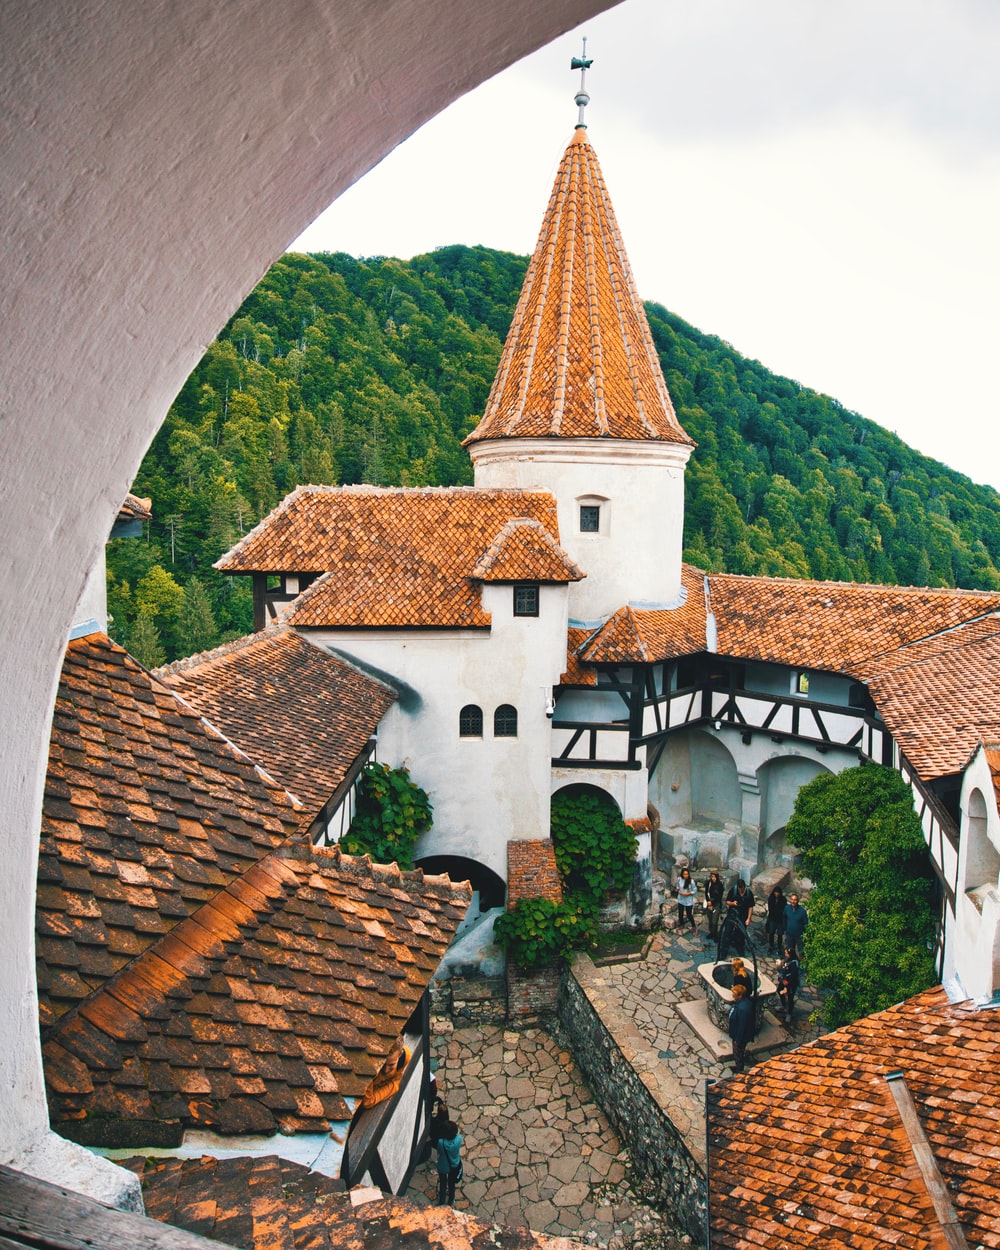 Bran Castle Picture. Download Free Image